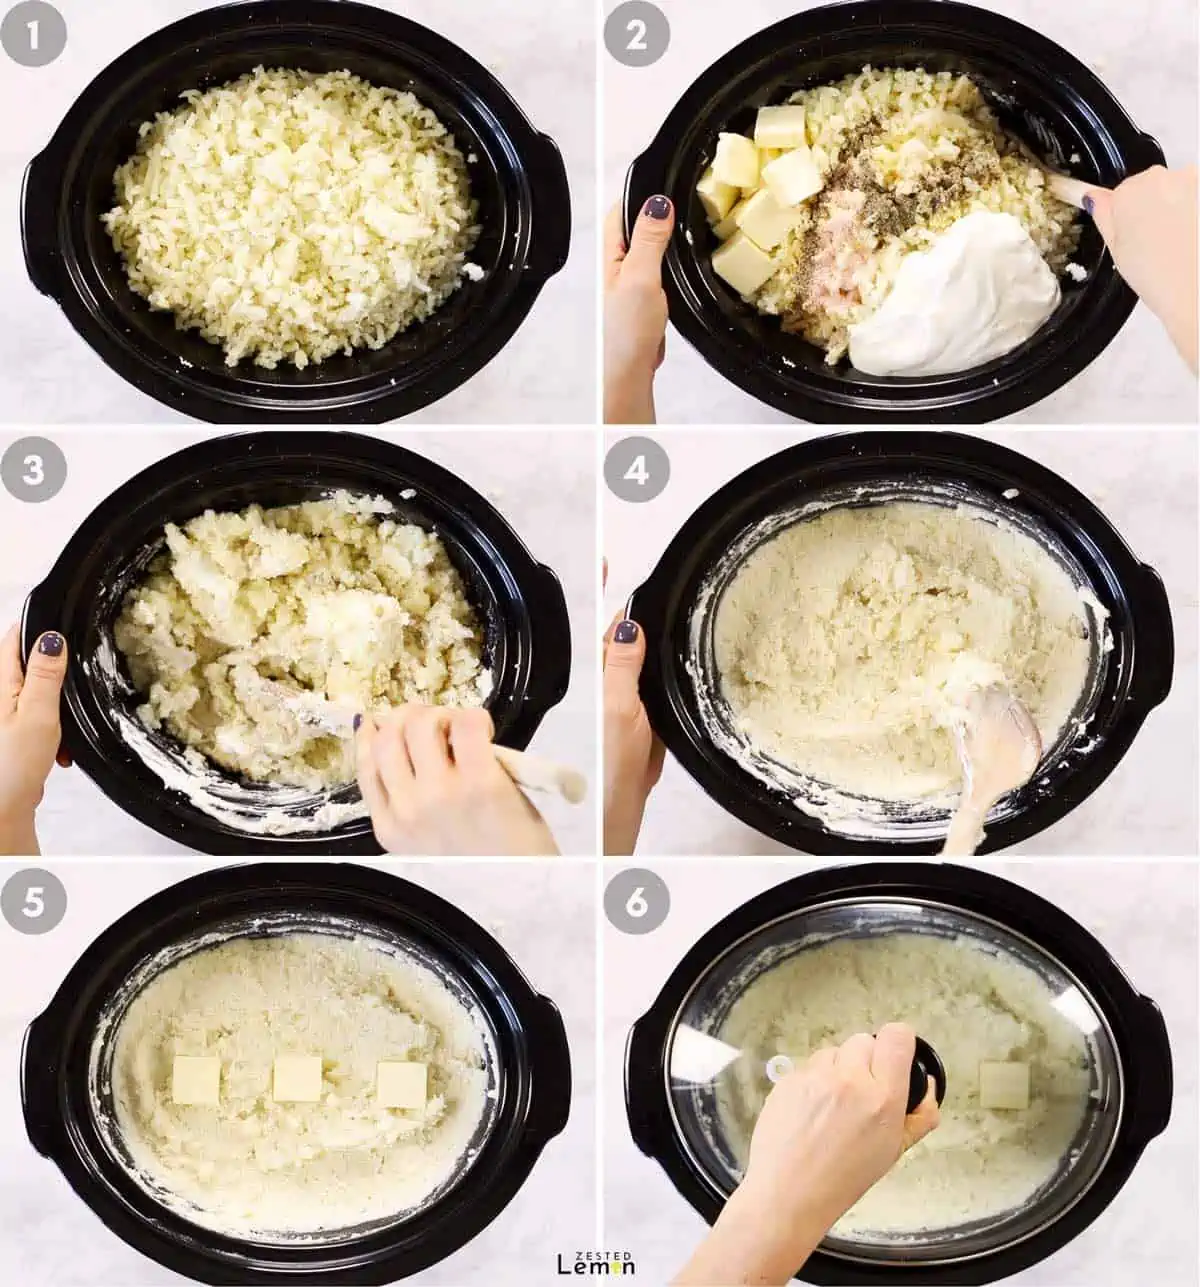 Adding ingredients to potatoes in slow cooker and mixing. 